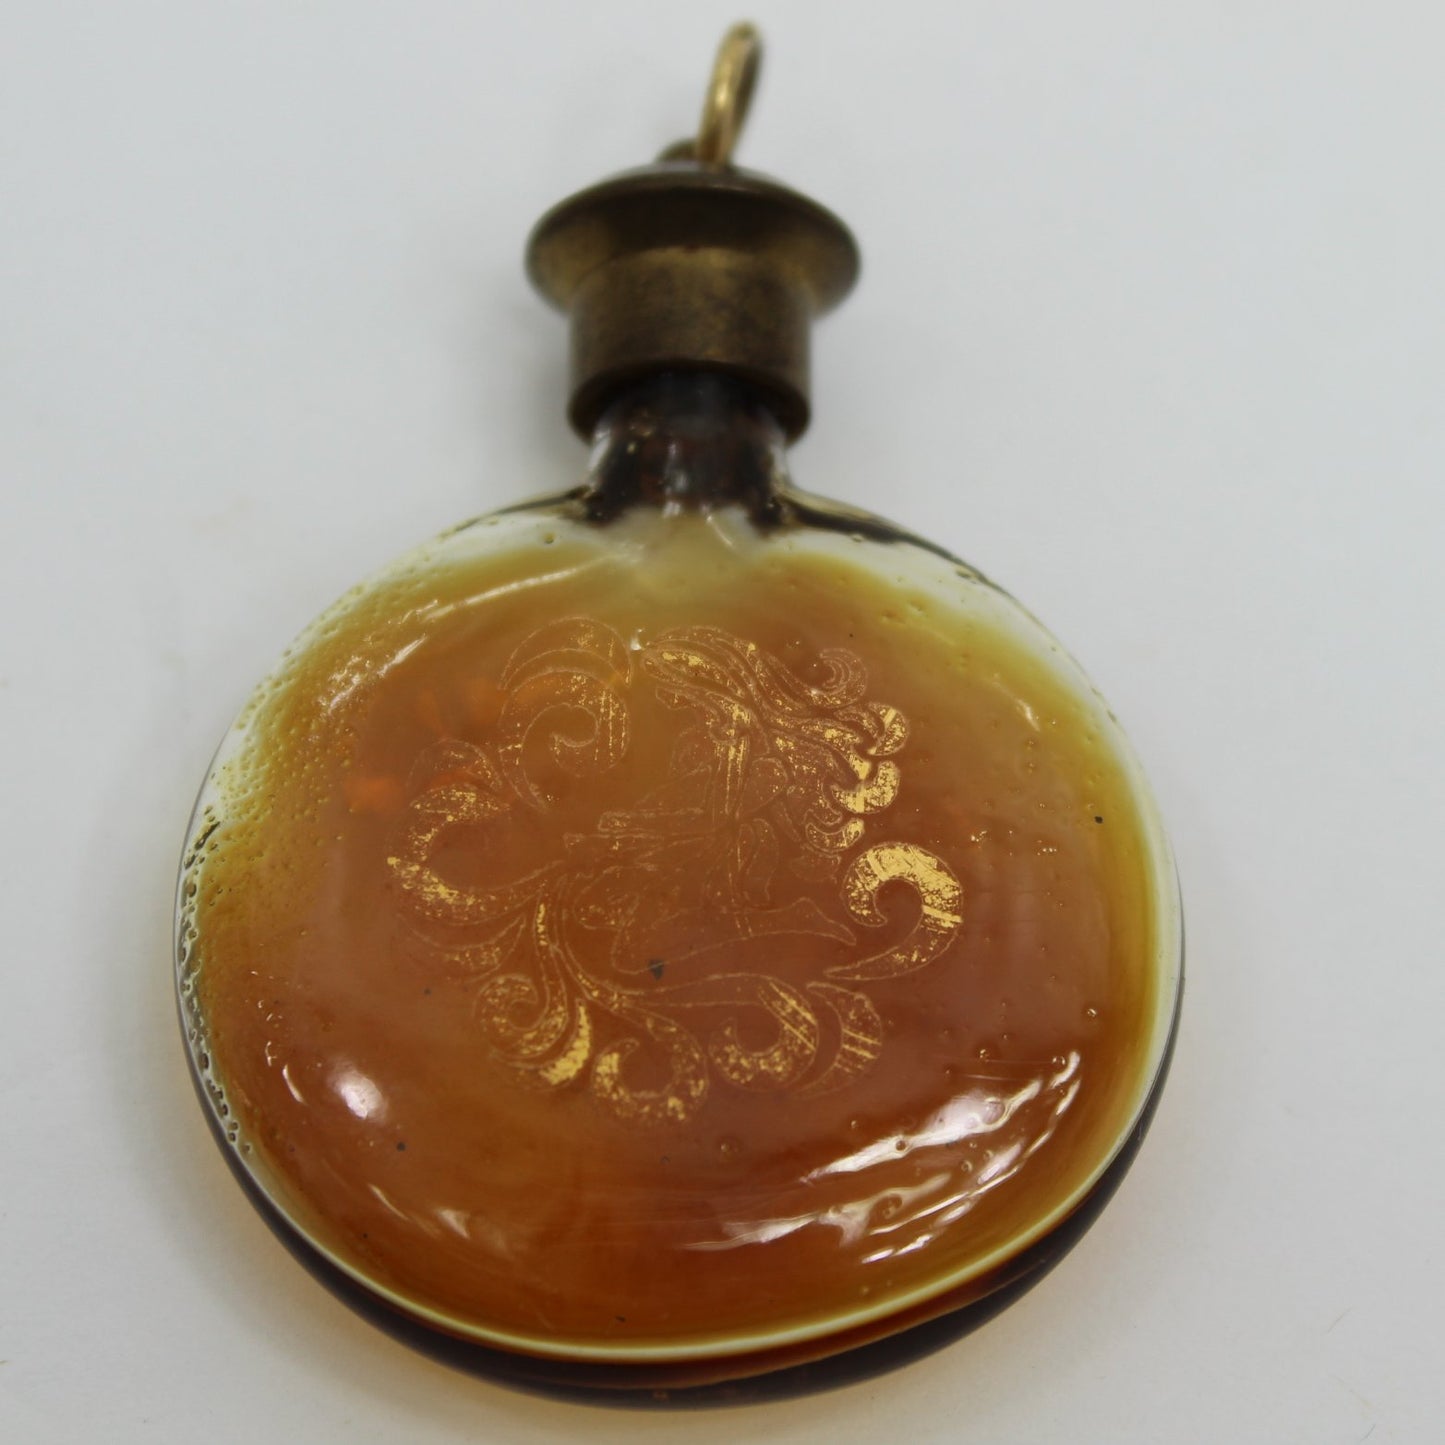 Antique Victorian Nymph Chatelaine Scent Bottle Lay Down Perfume Gilt Decorated musician fairy